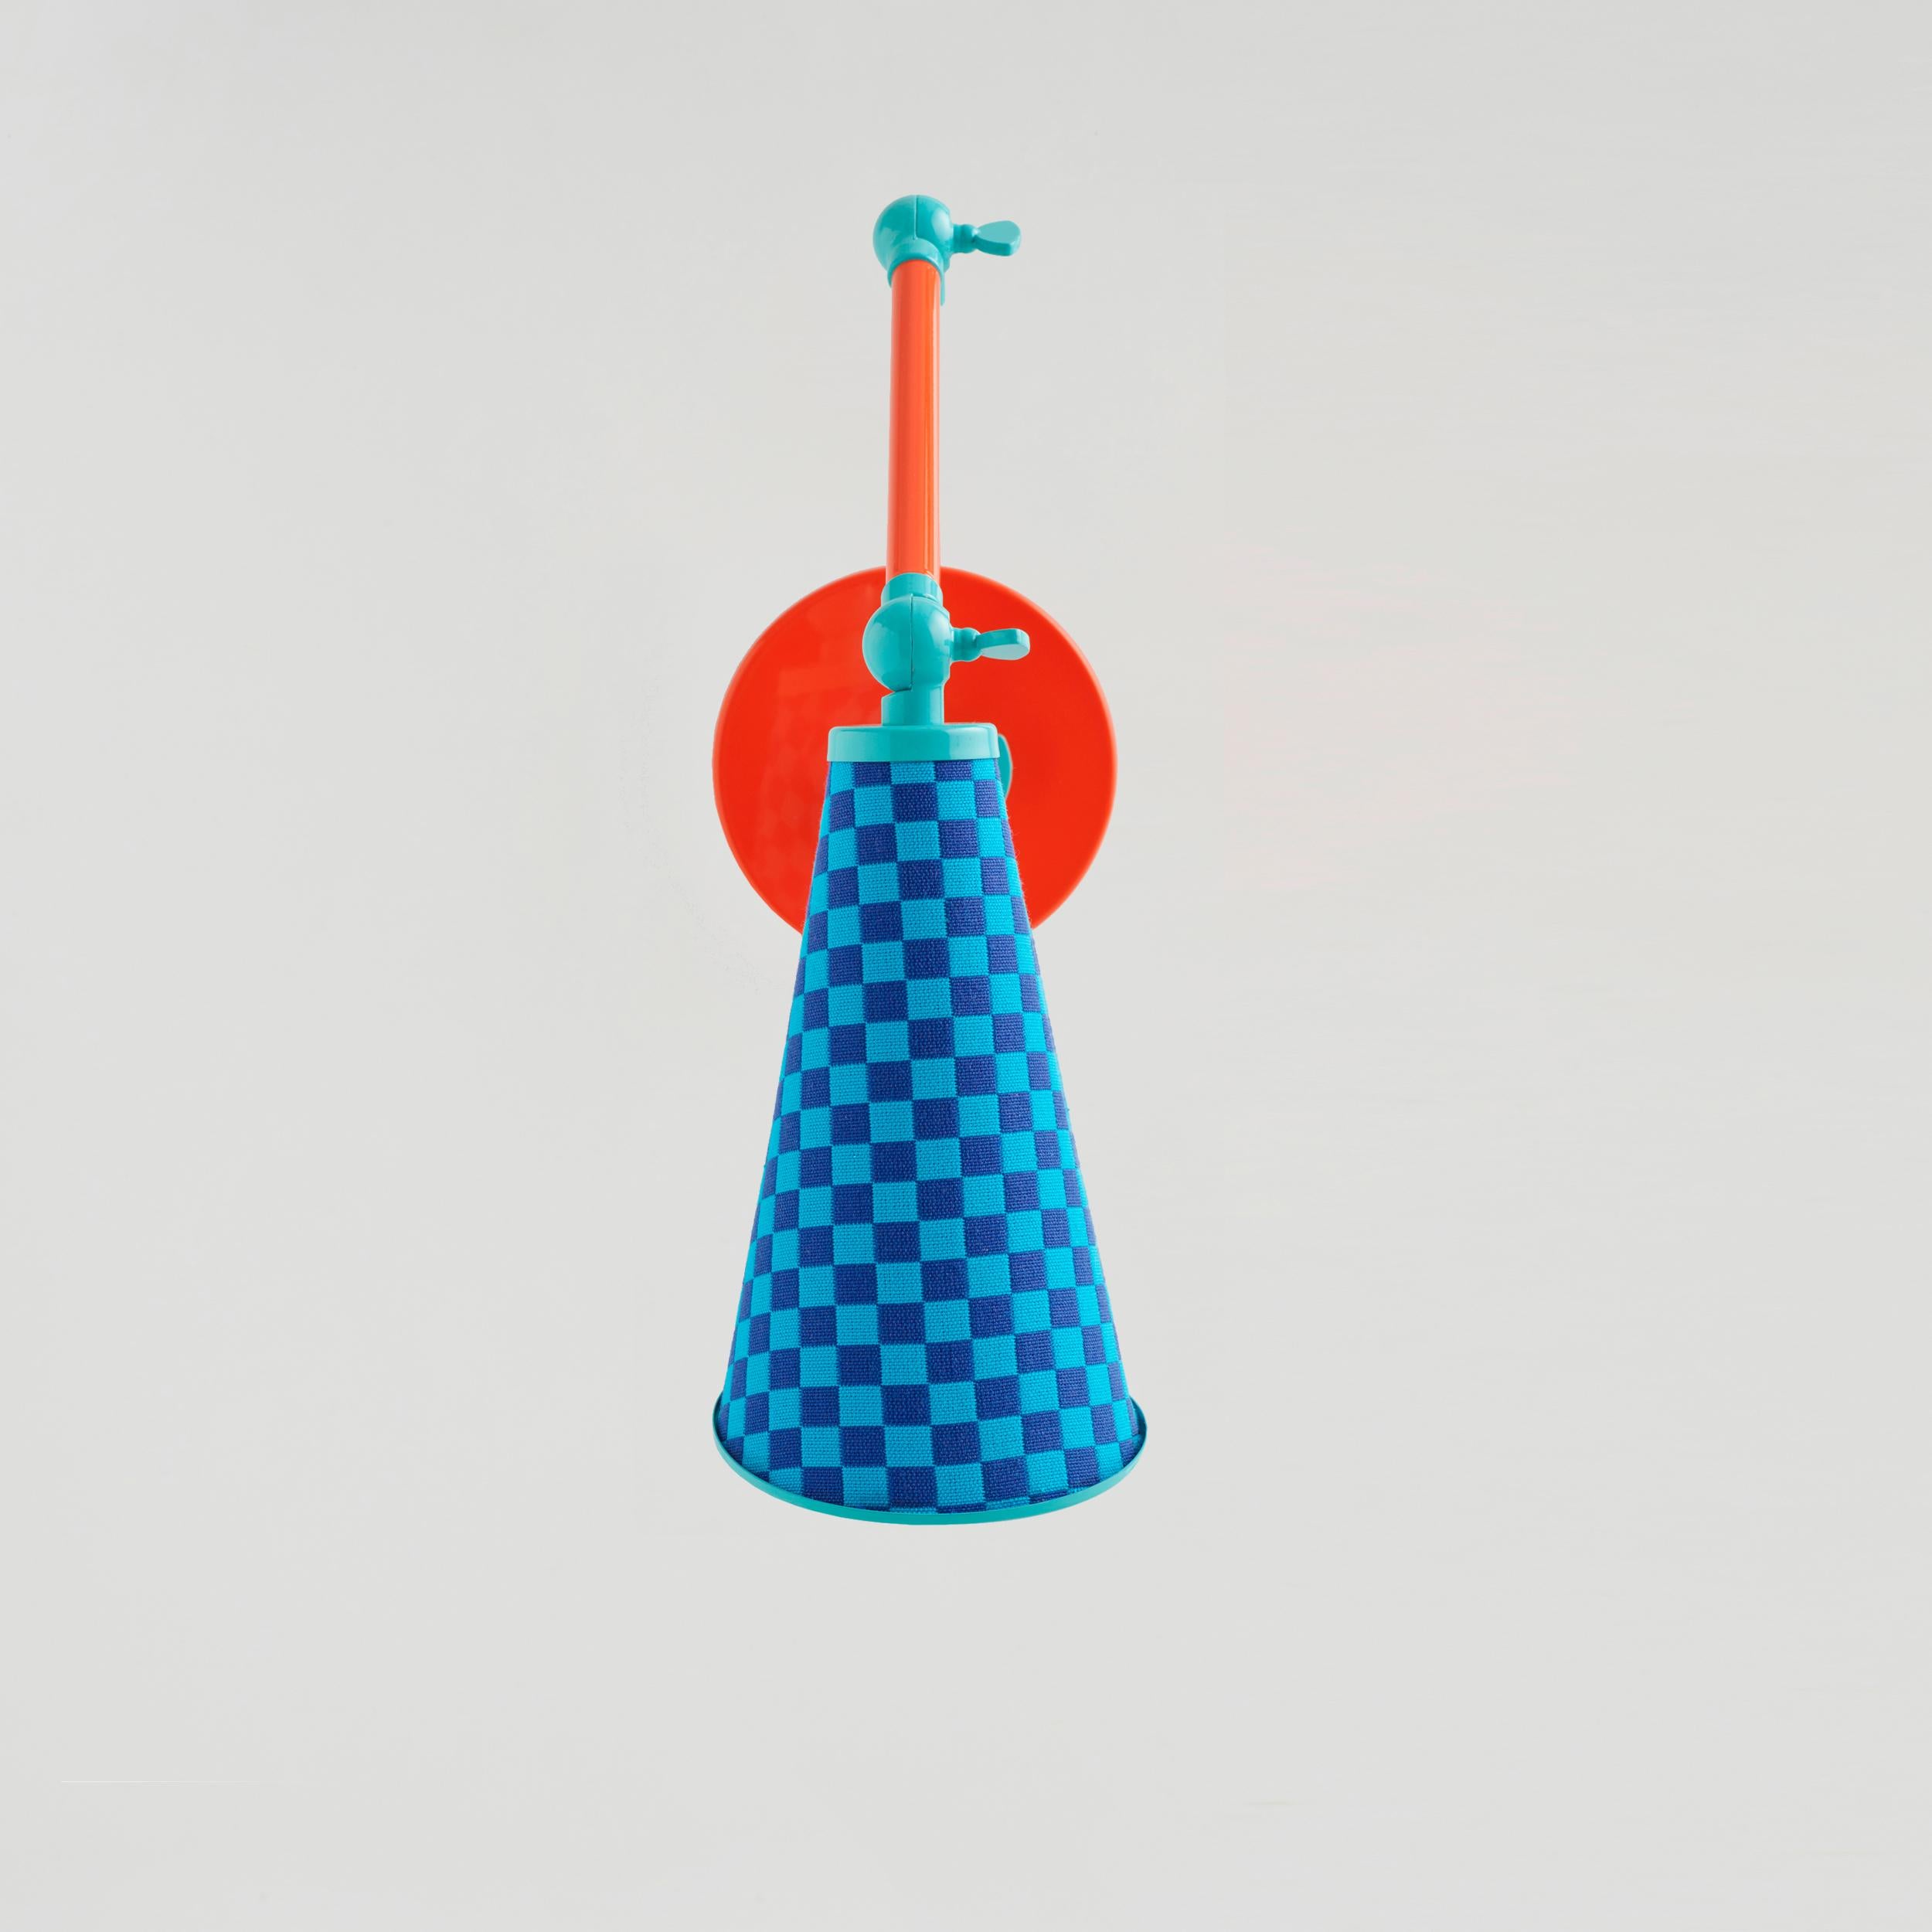 Lanterna sconce is a new age robot lamp with a heart. Unique Alexander Girard designed checkered fabric is combined with orange and light blue colored metal. Adjustable arms of Lanterna enables users to justify the form and position of the lamp.